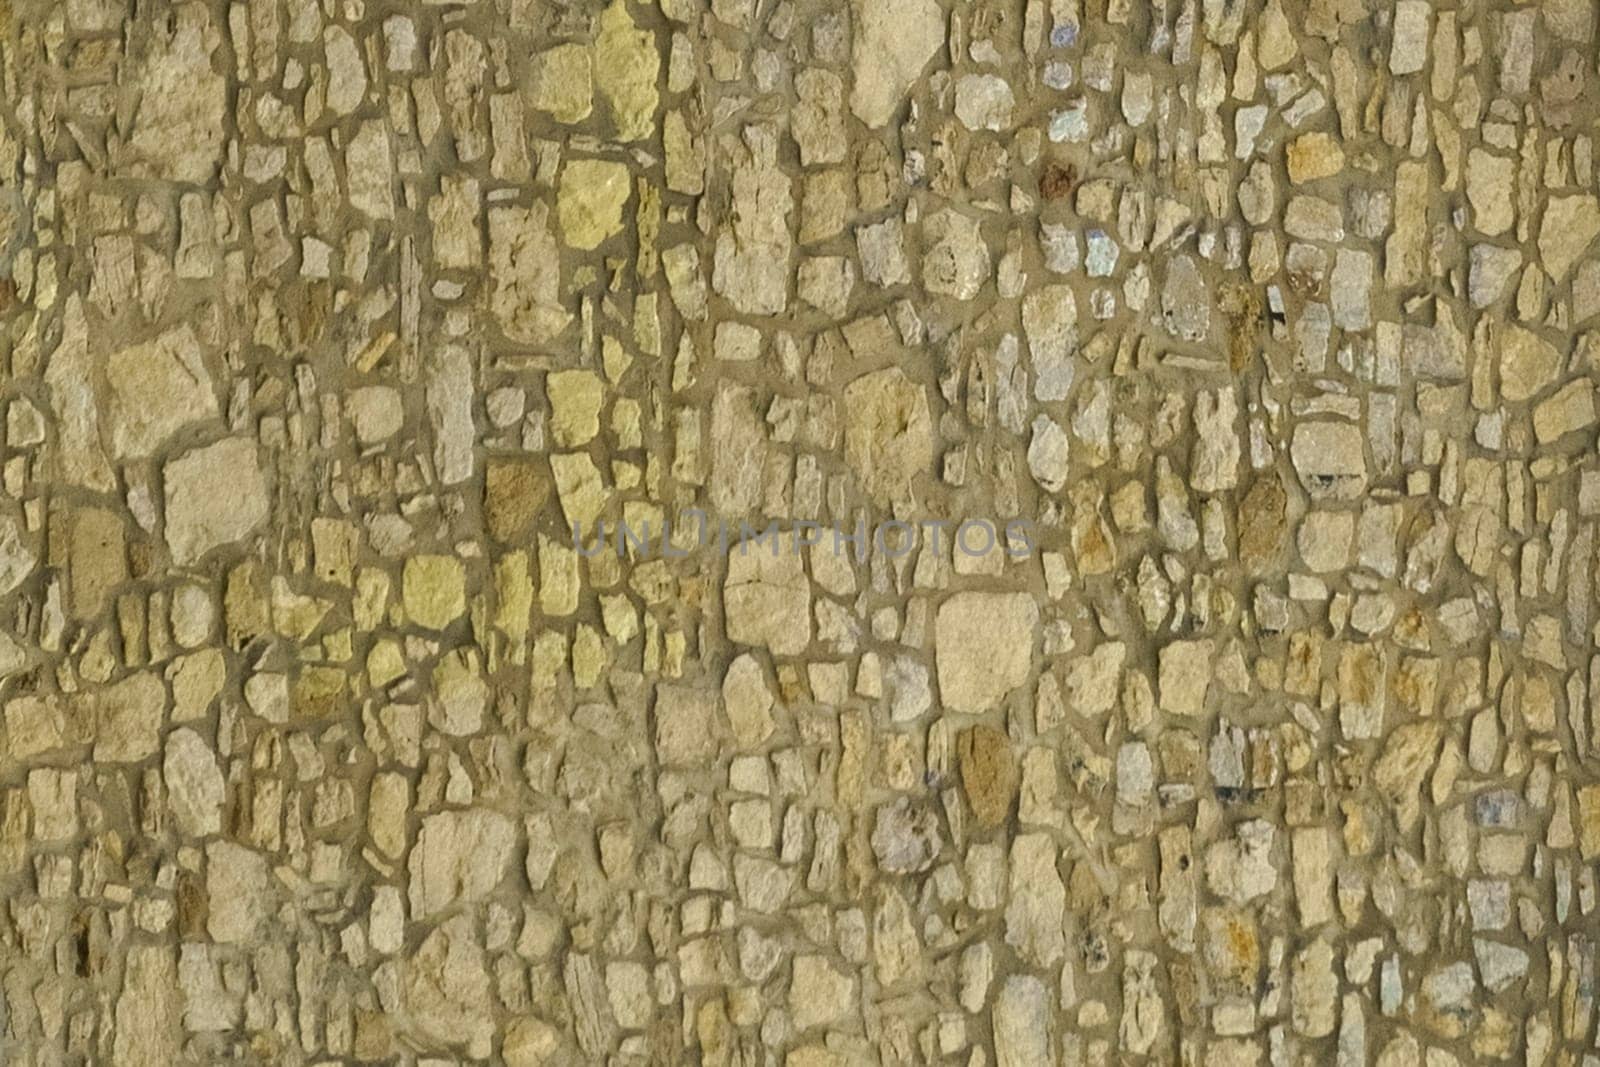 A detailed close up view of a textured stone wall showcasing its unique patterns and rough surface.